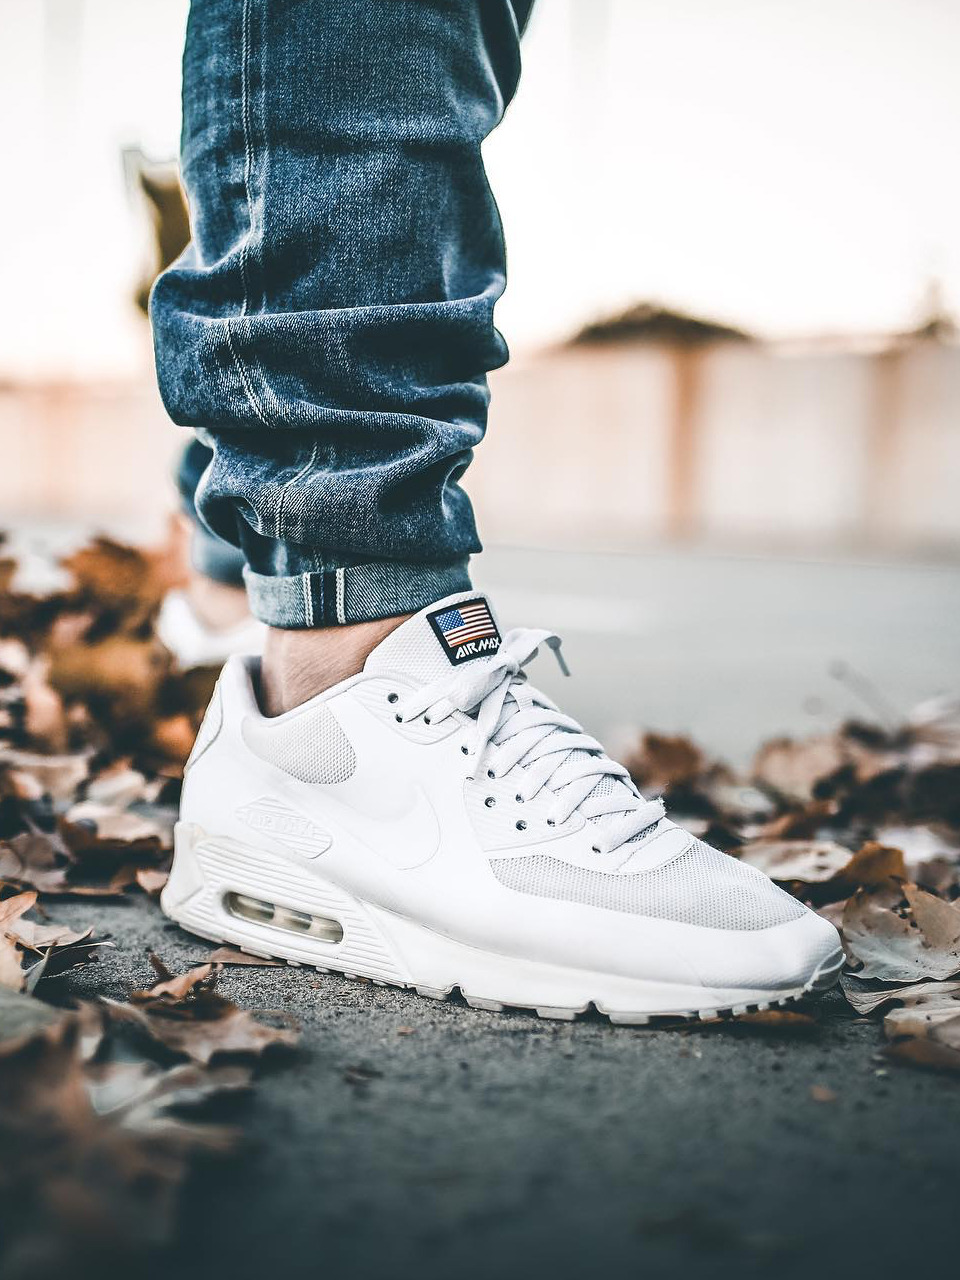 Nike Air Max 90 Hyperfuse 'Independence 